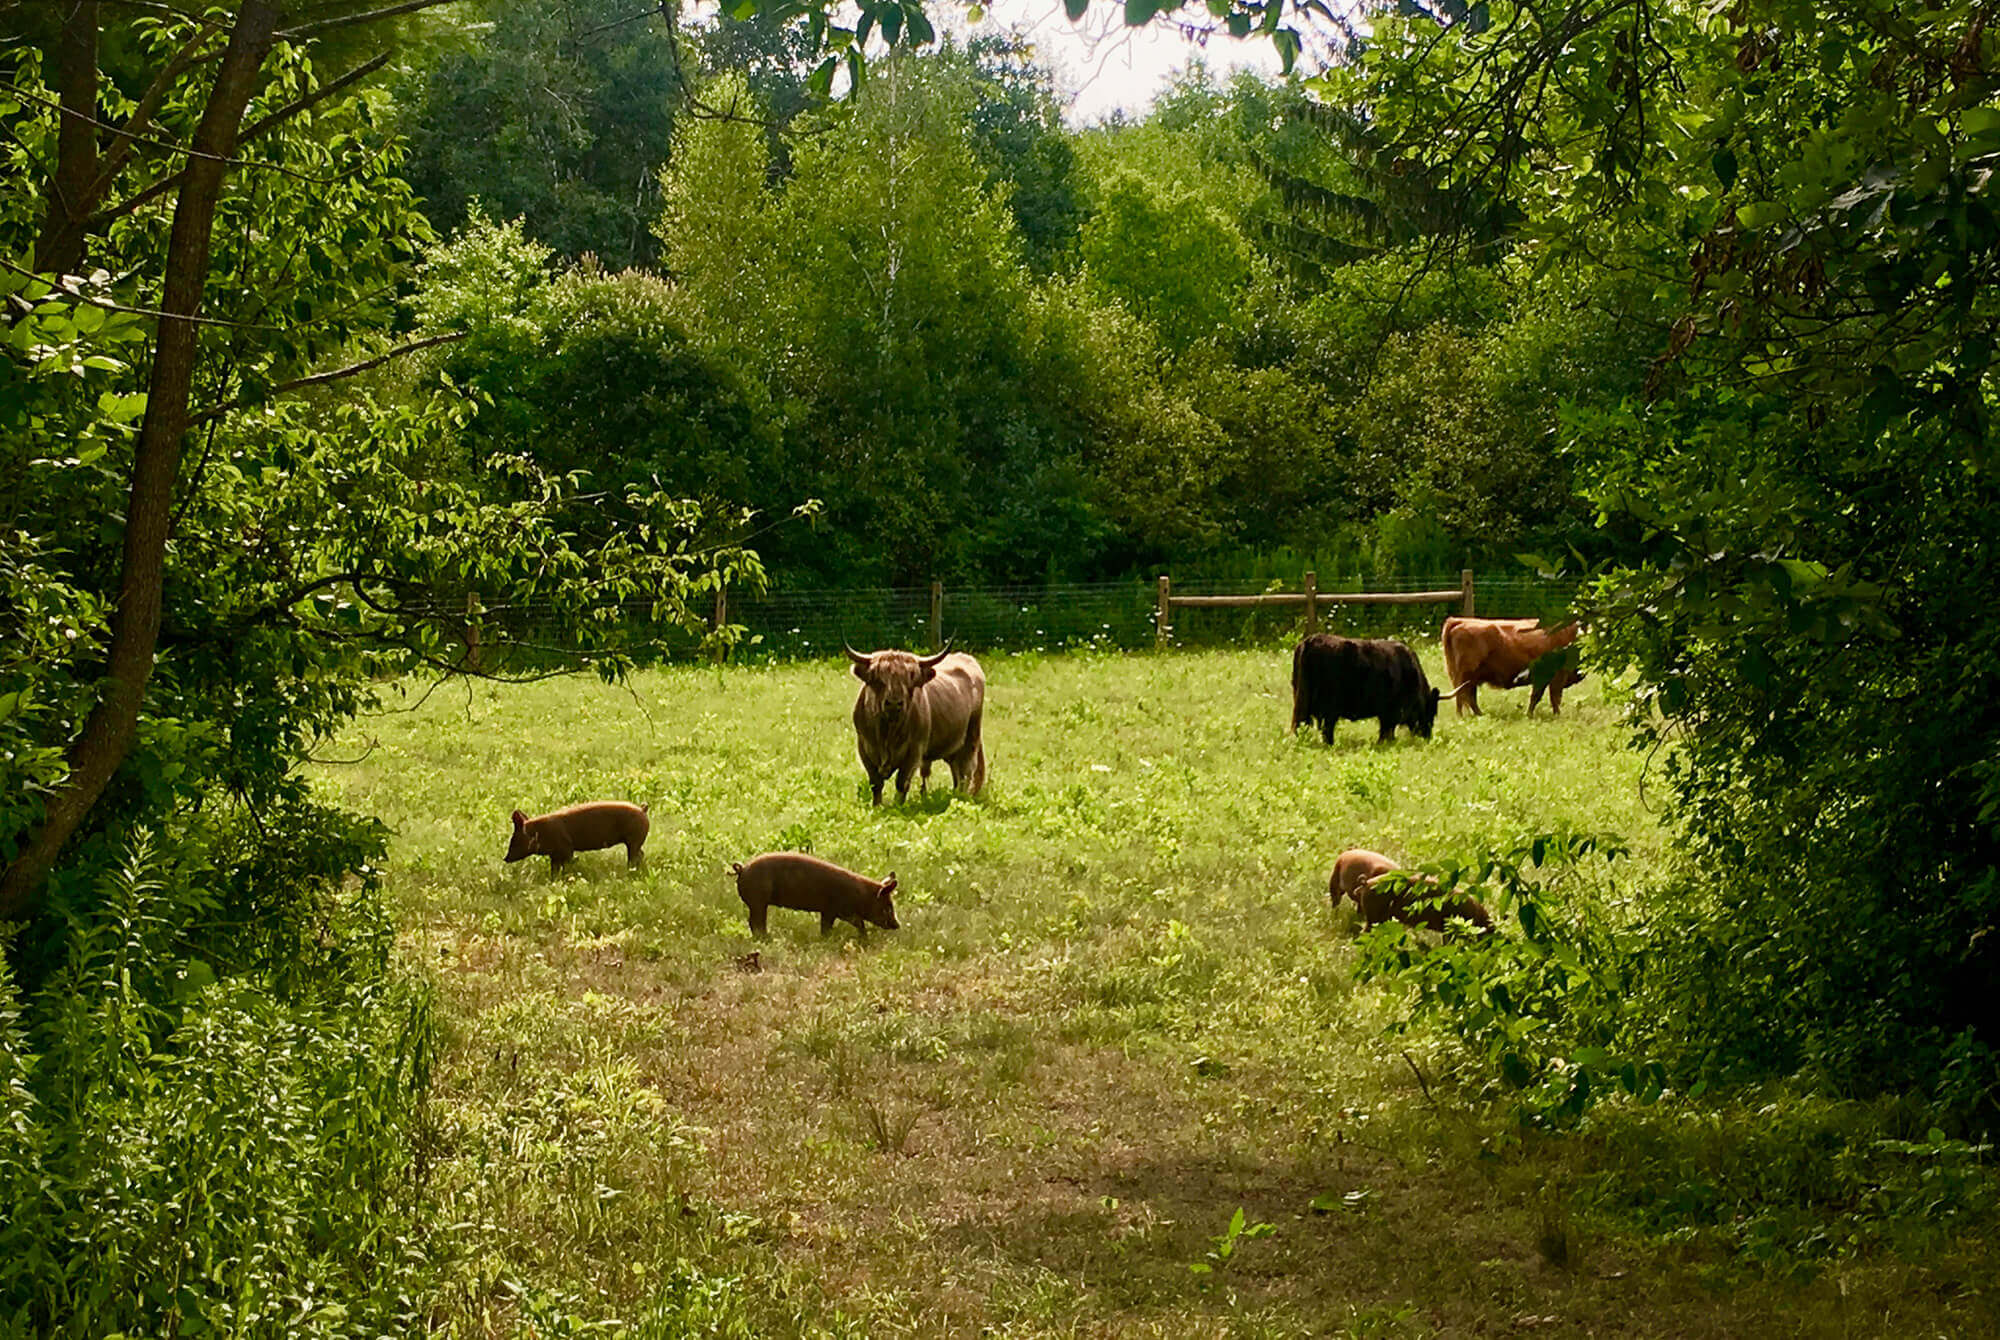 A few of the animals on the farm grazing in a field